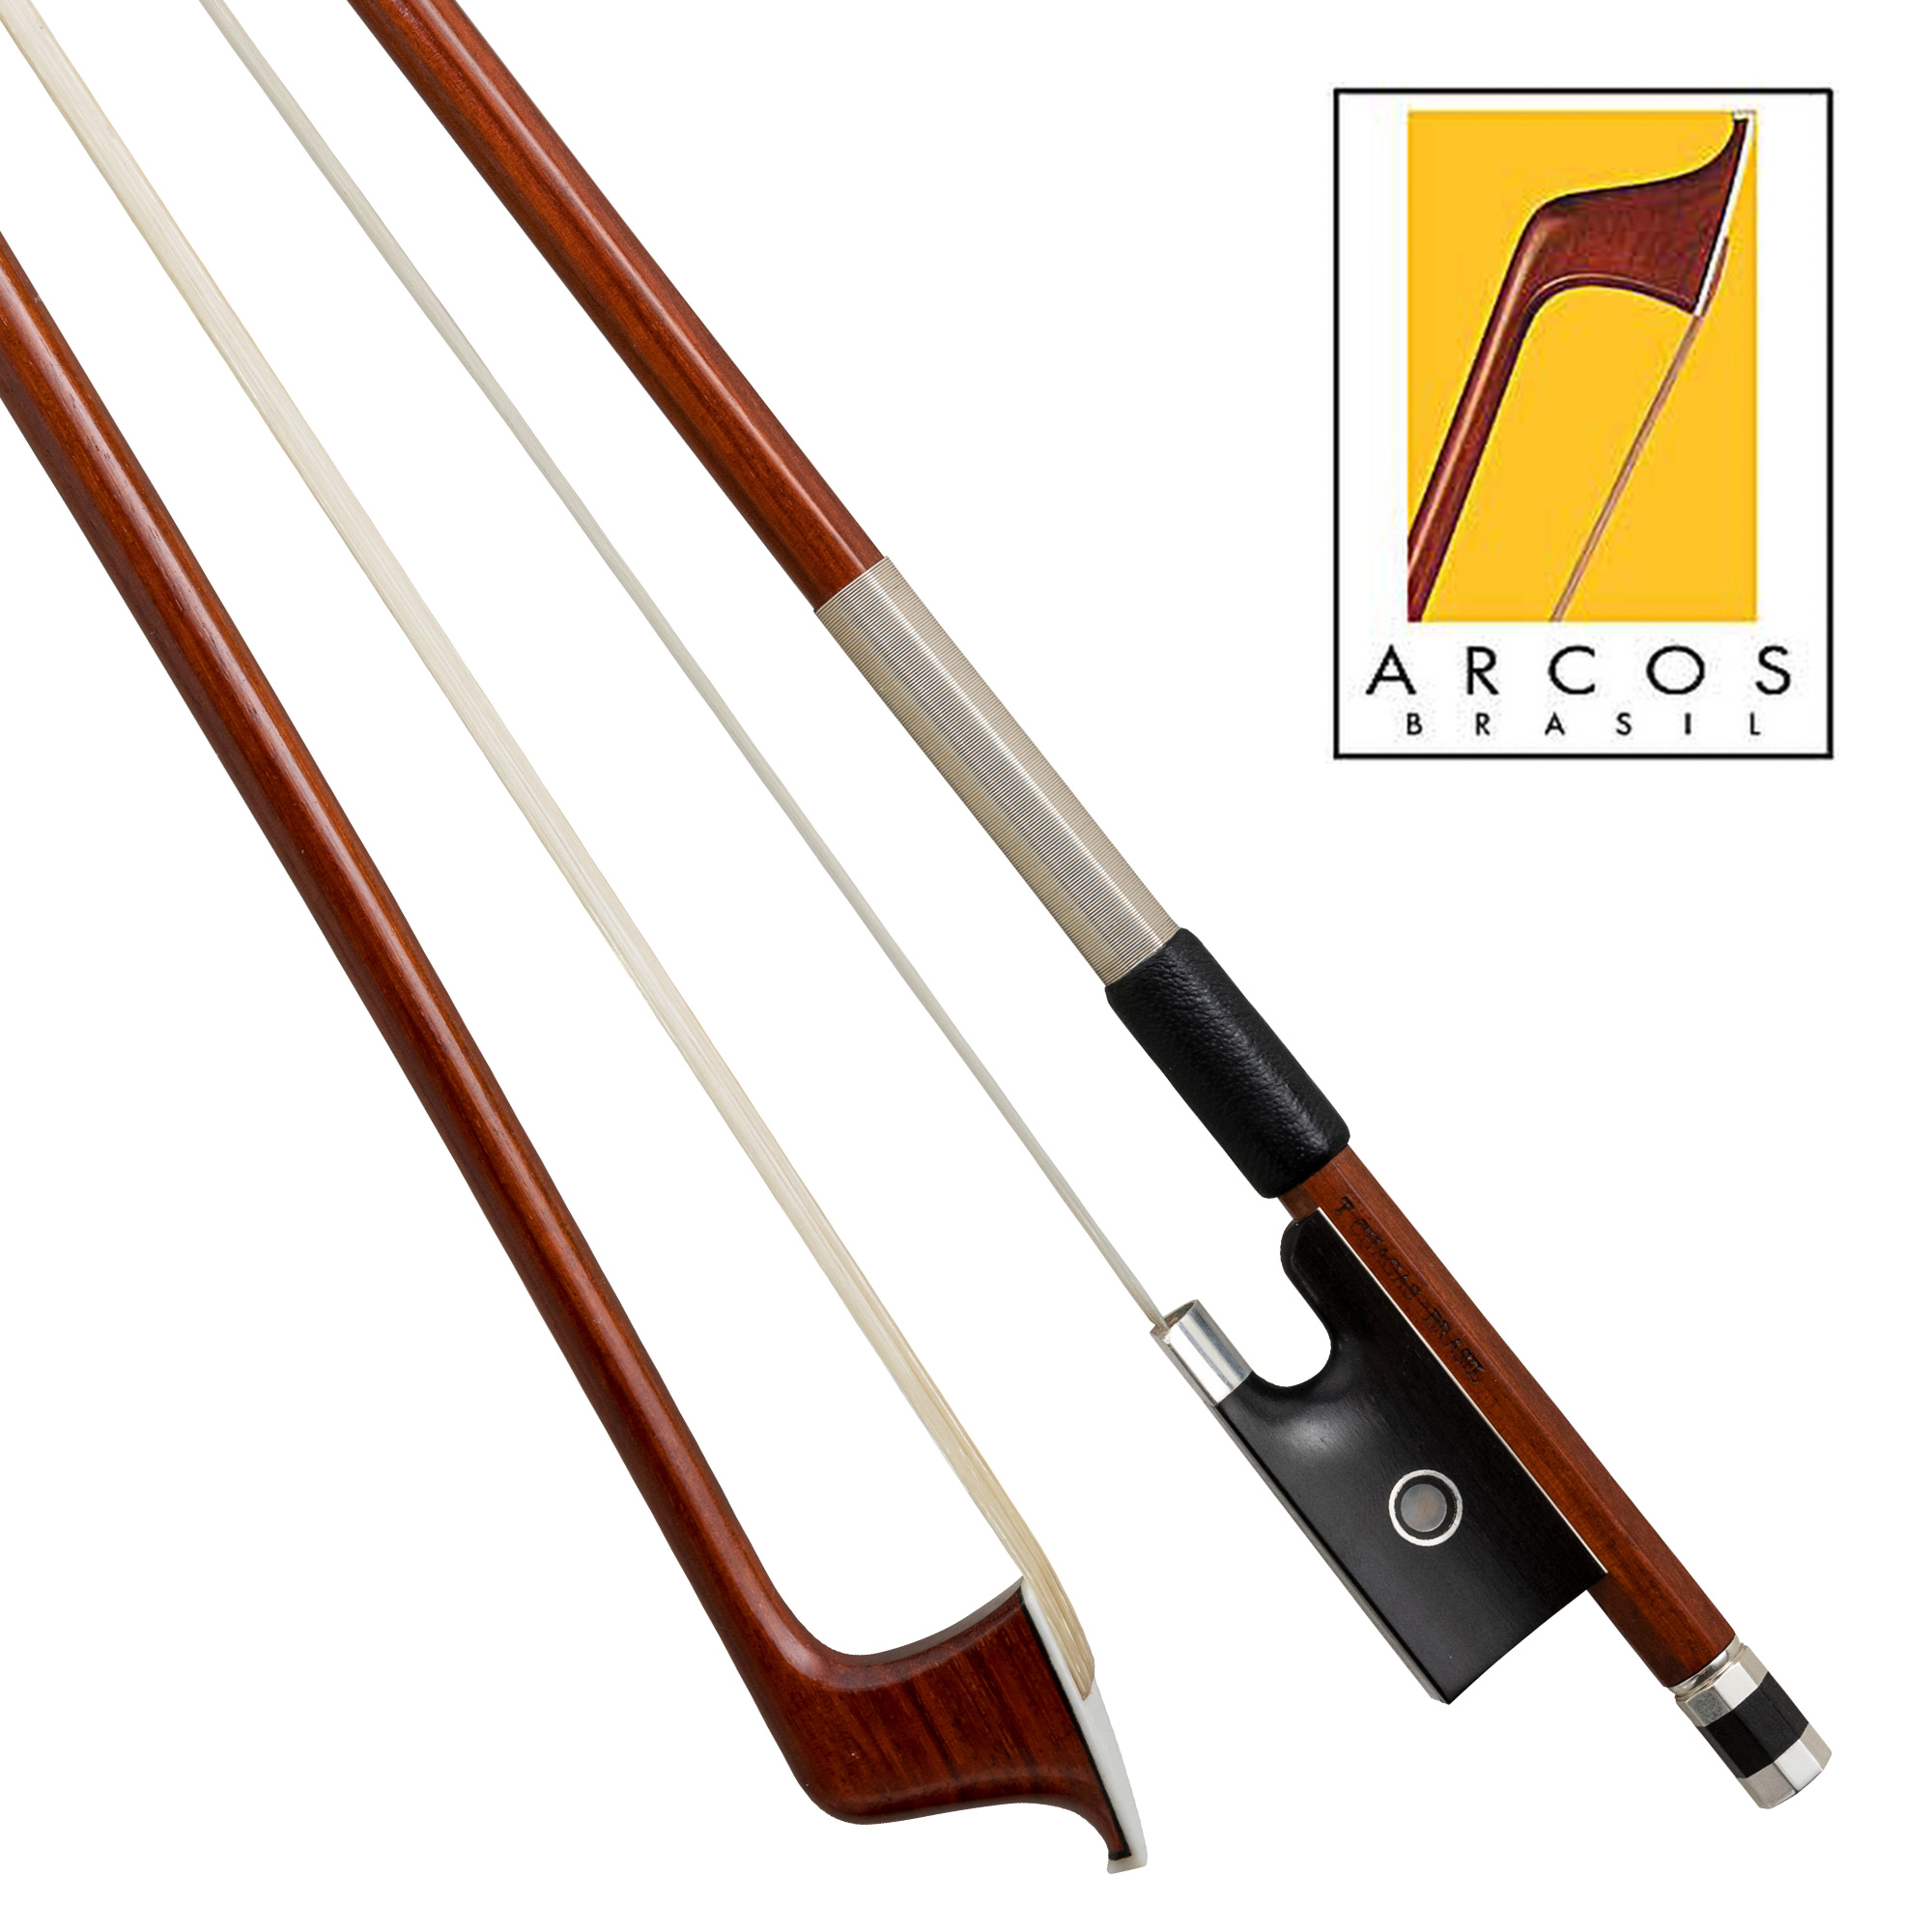 Arcos Brasil Silver Mounted Violin Bow in action